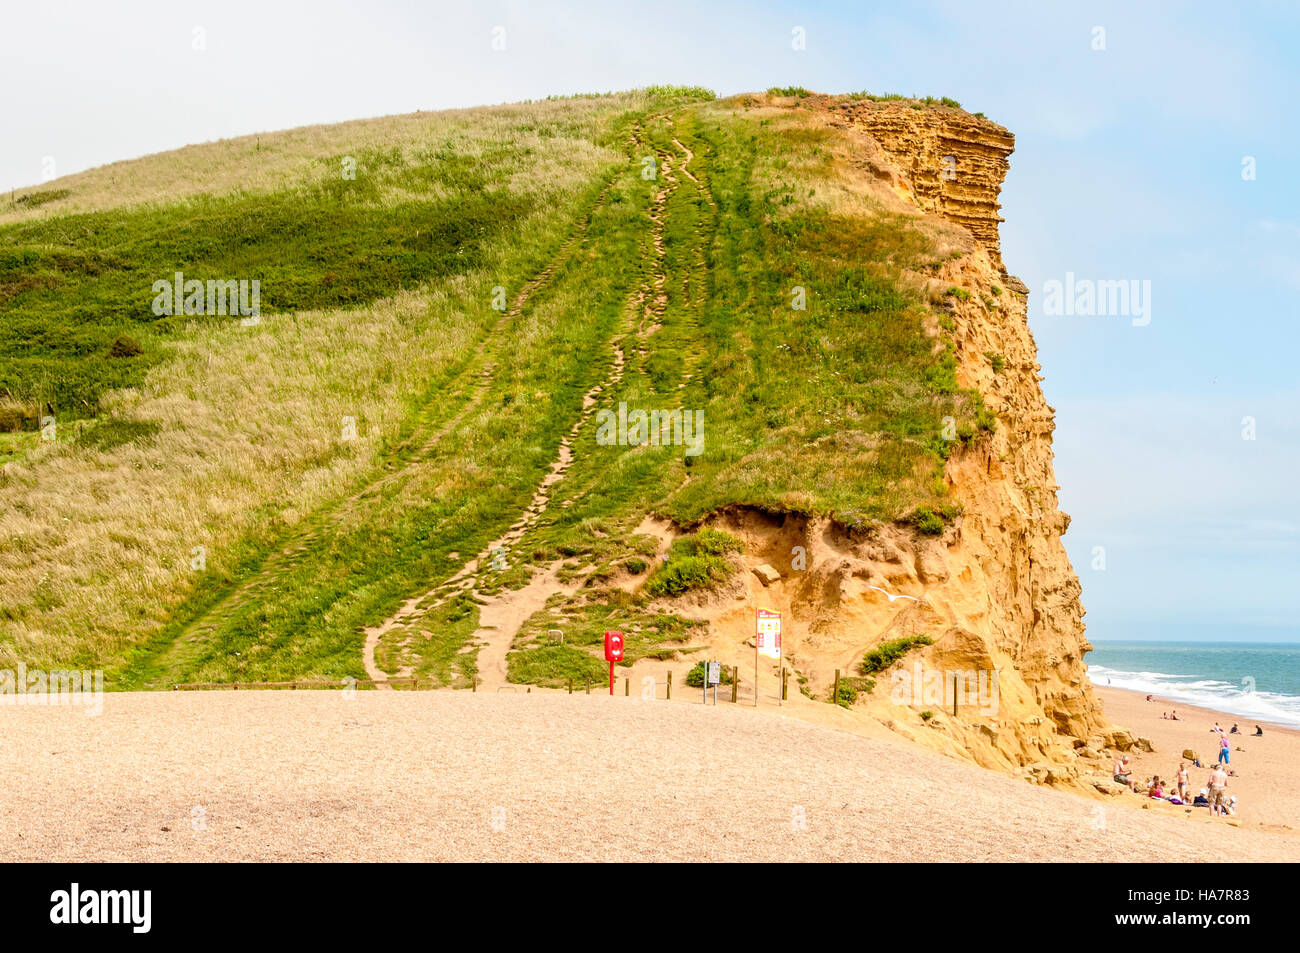 A steep path climbs from relatively flat sand through green vegetation to the top of the vertical East Cliff at Bridport Sands Stock Photo